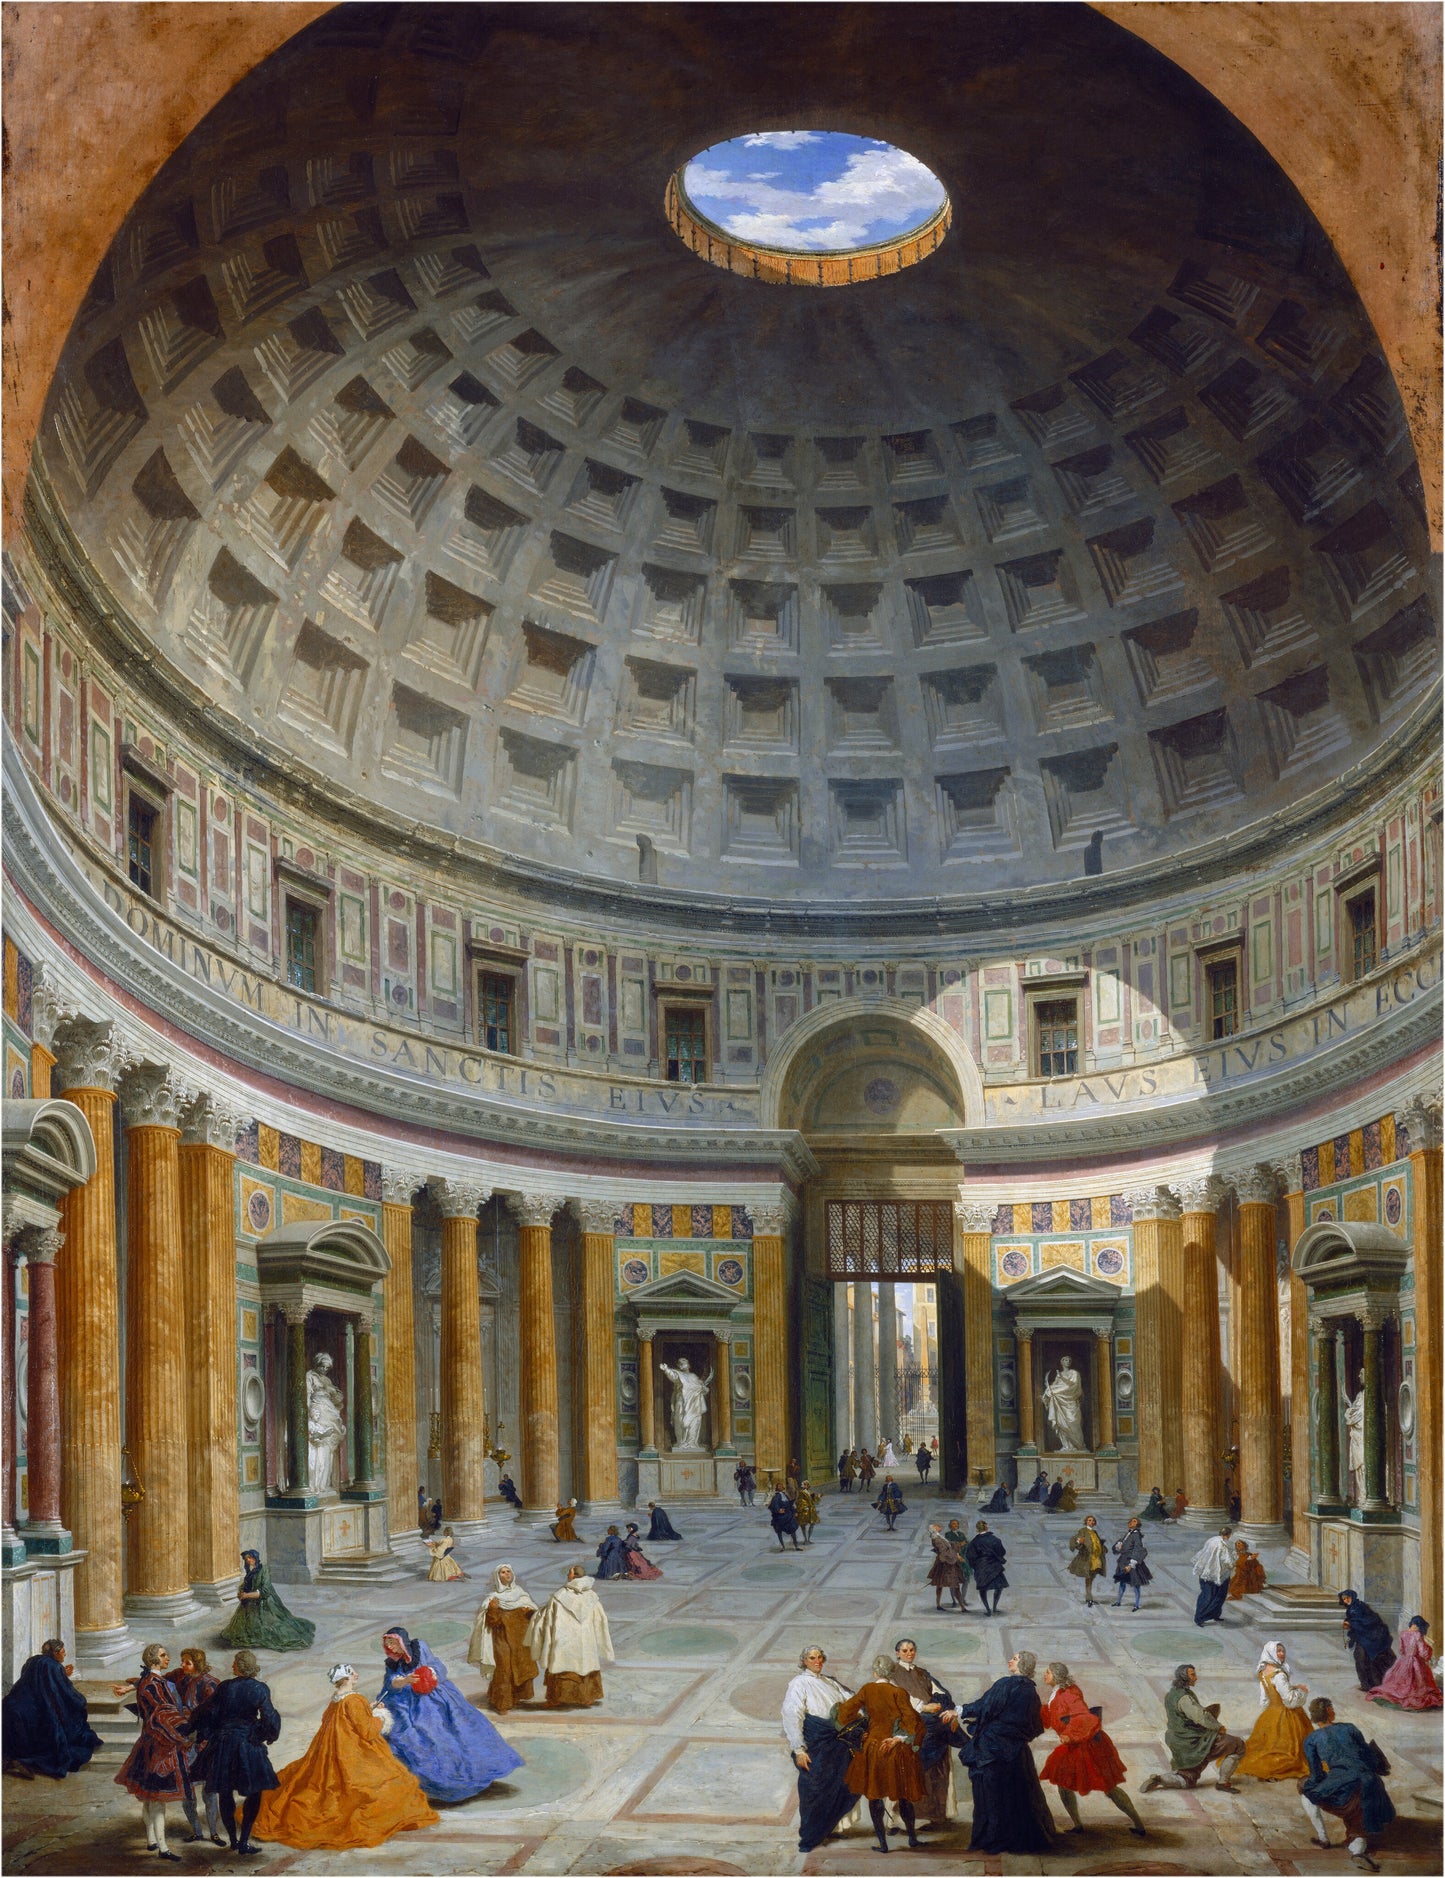 The Interior of the Pantheon